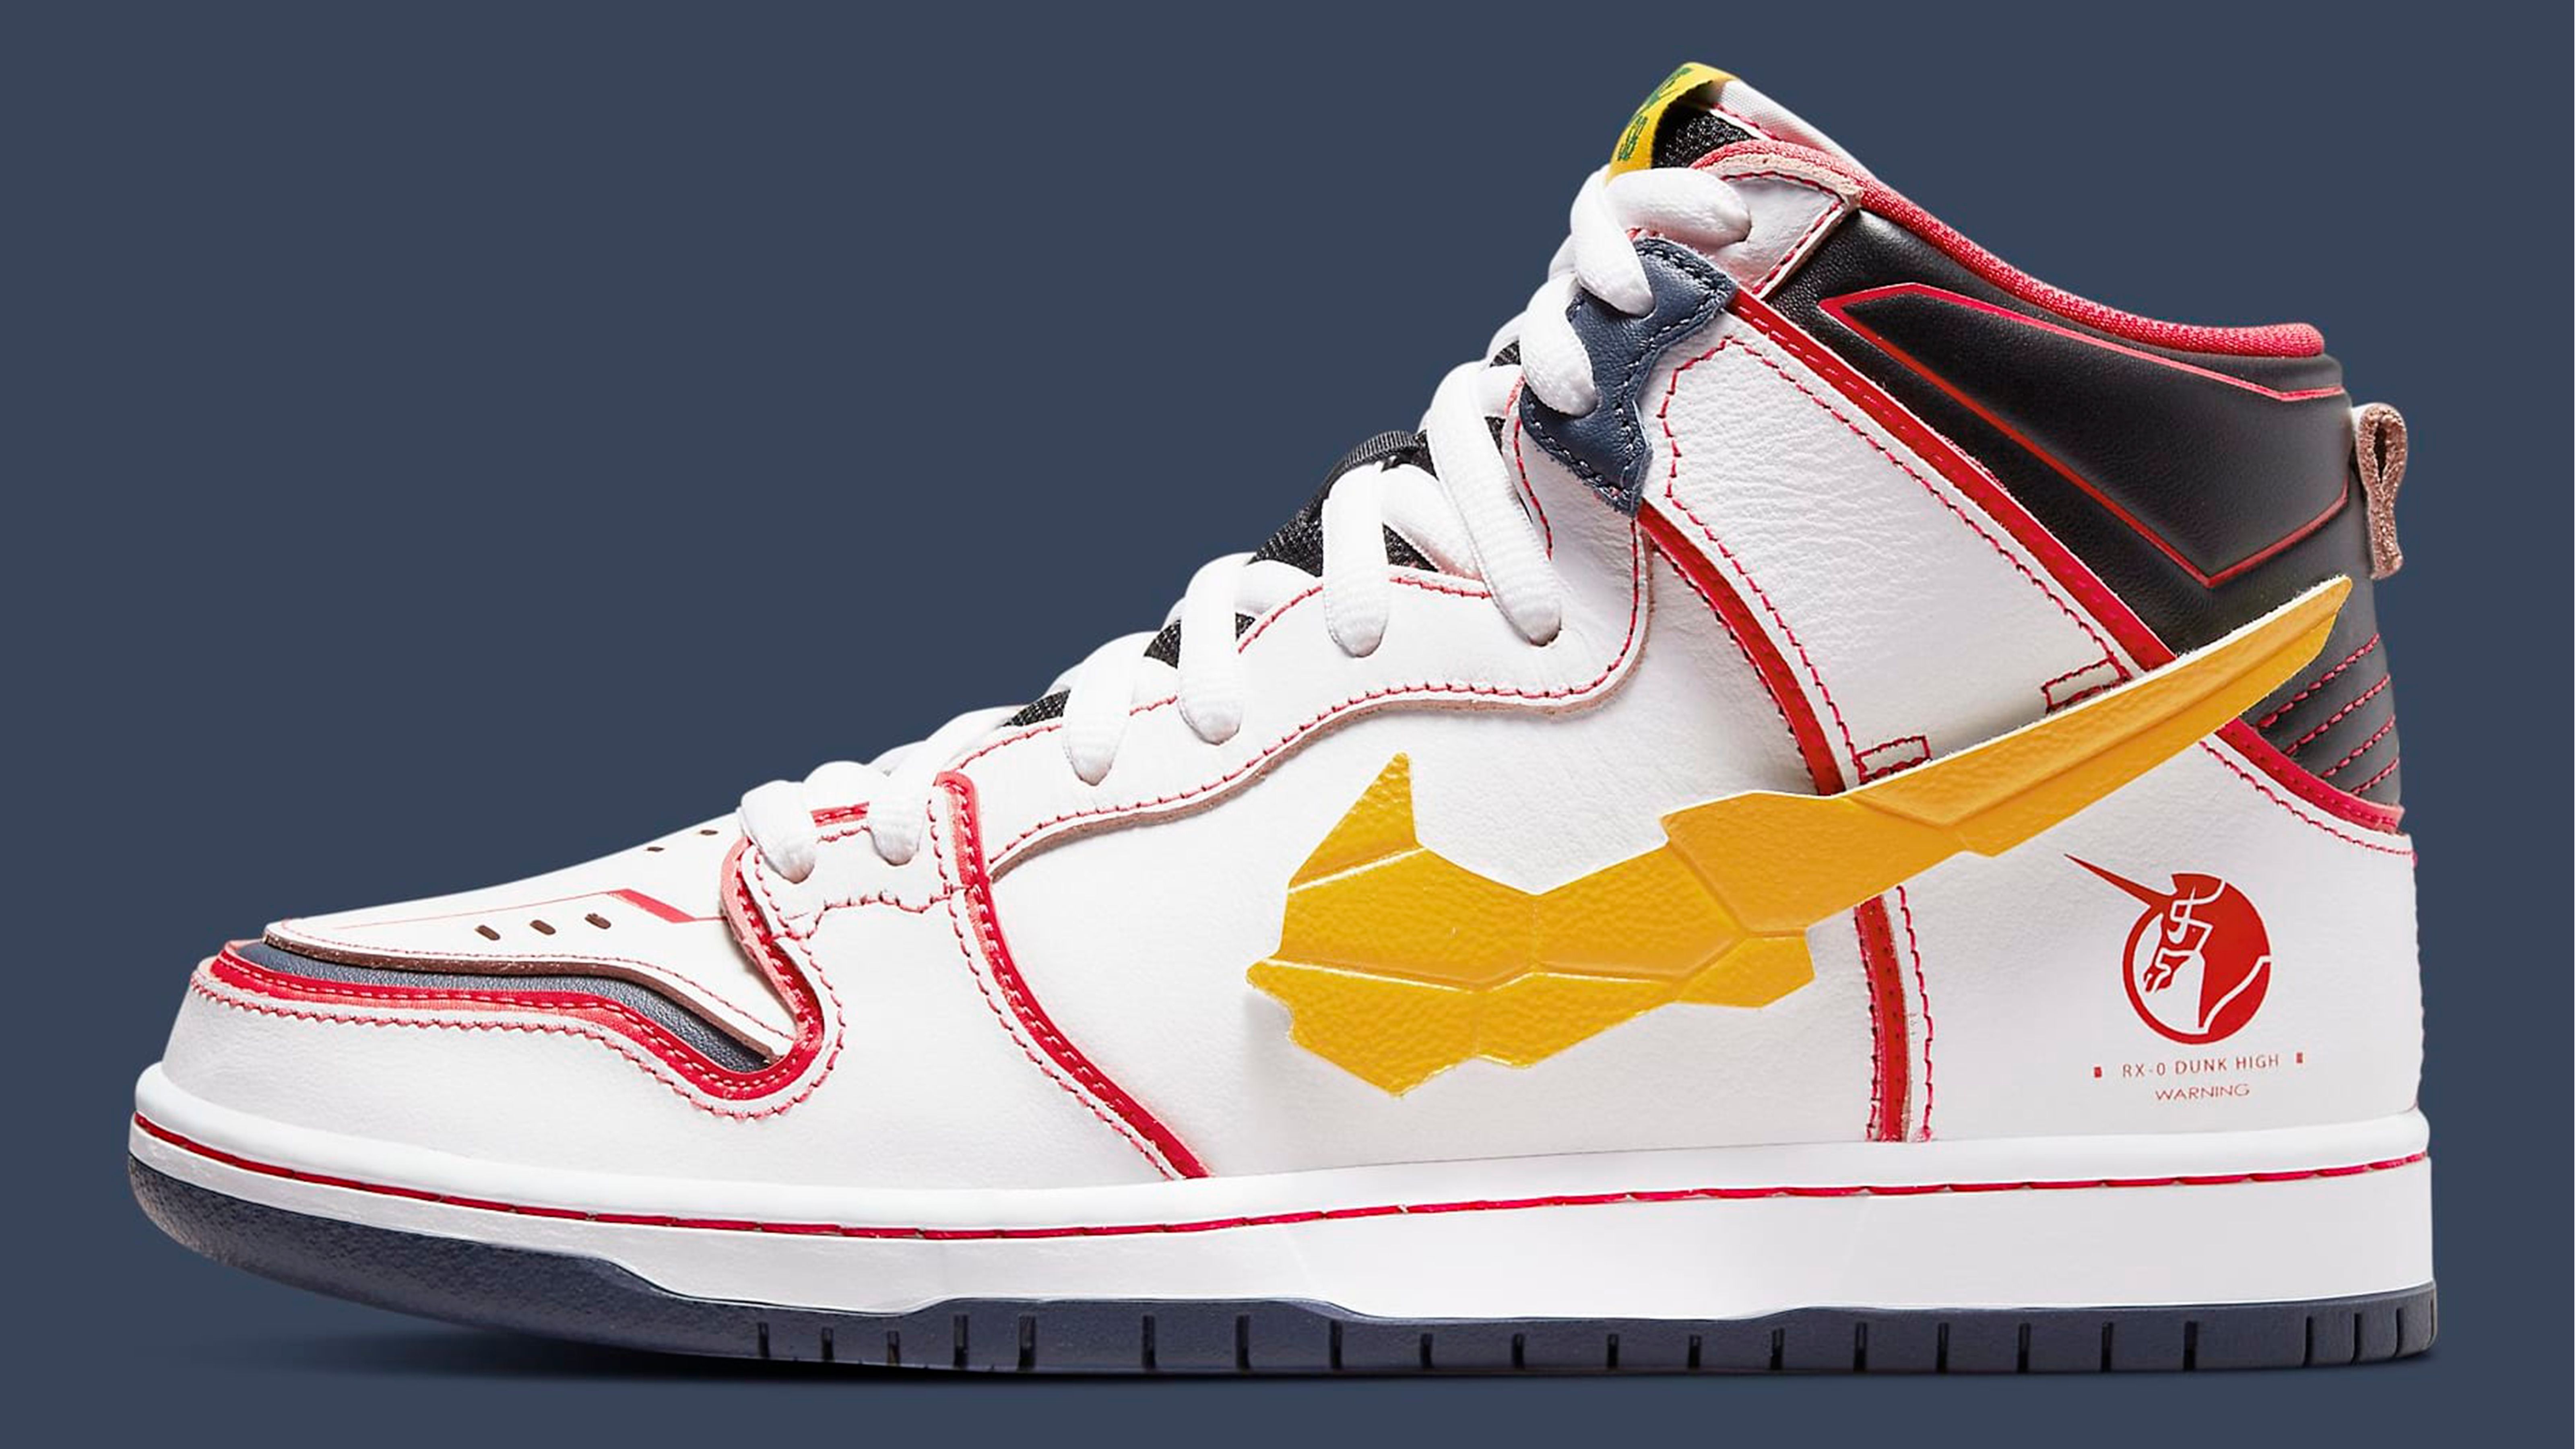 Nike ushers in Gundam collaboration kicks this week photo from Sole Collector